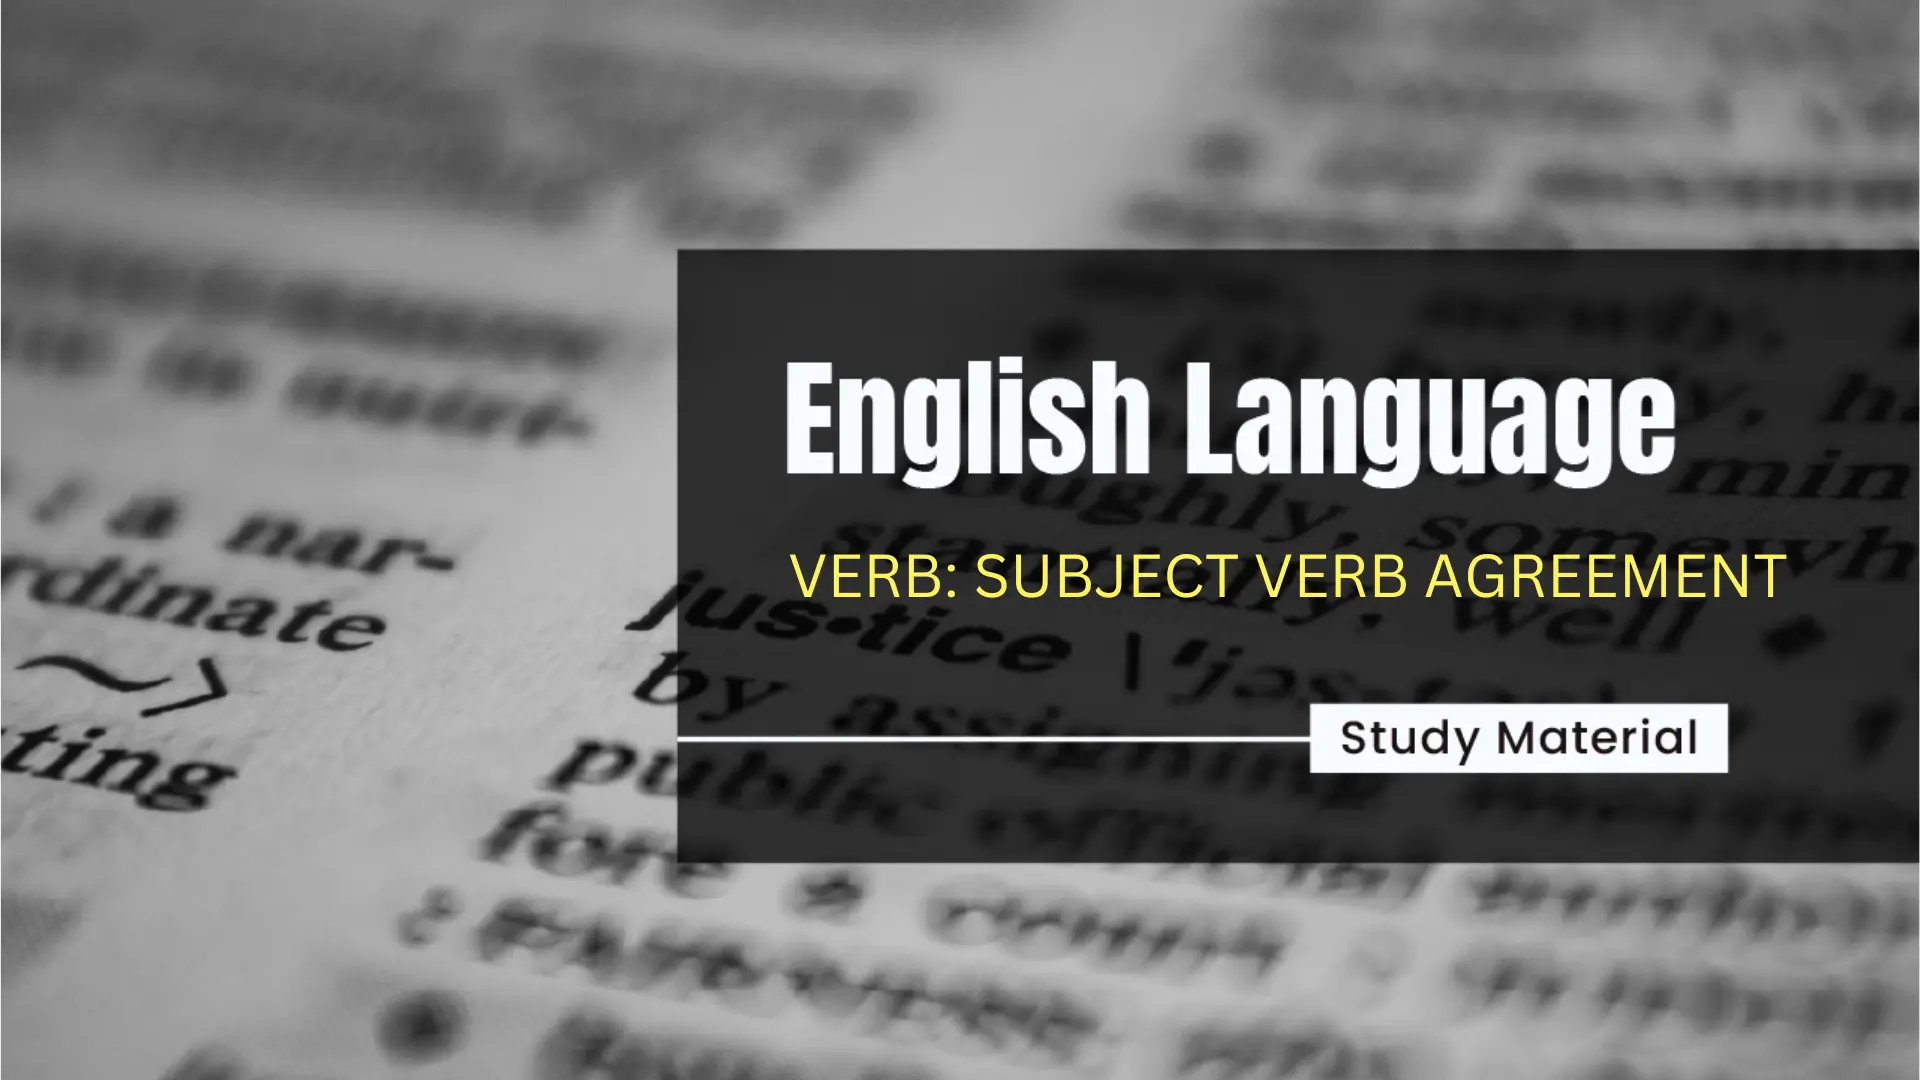 Subject Verb Agreement Definition Types Functions And Rules With Examples 6420